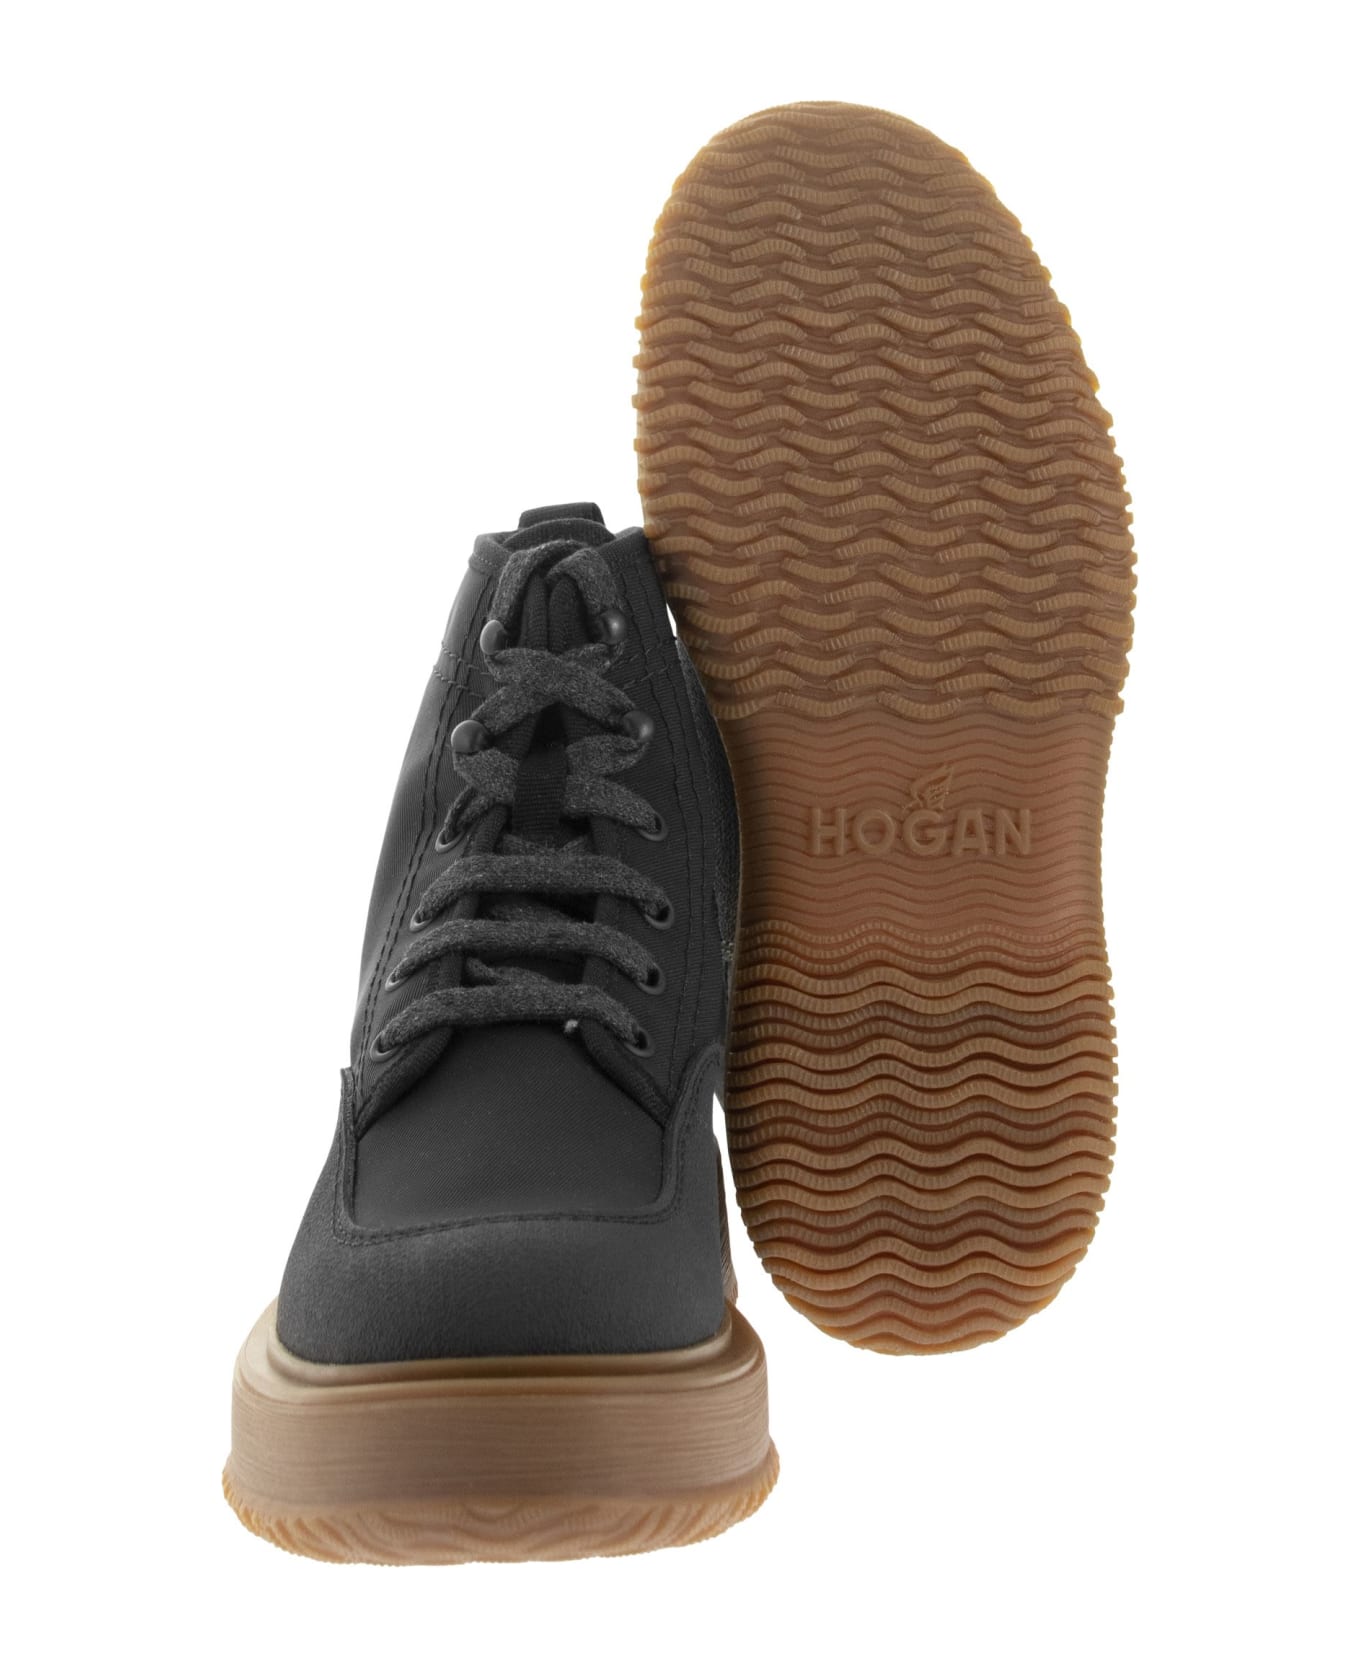 Hogan Untraditional - Laced Boot - Black ブーツ